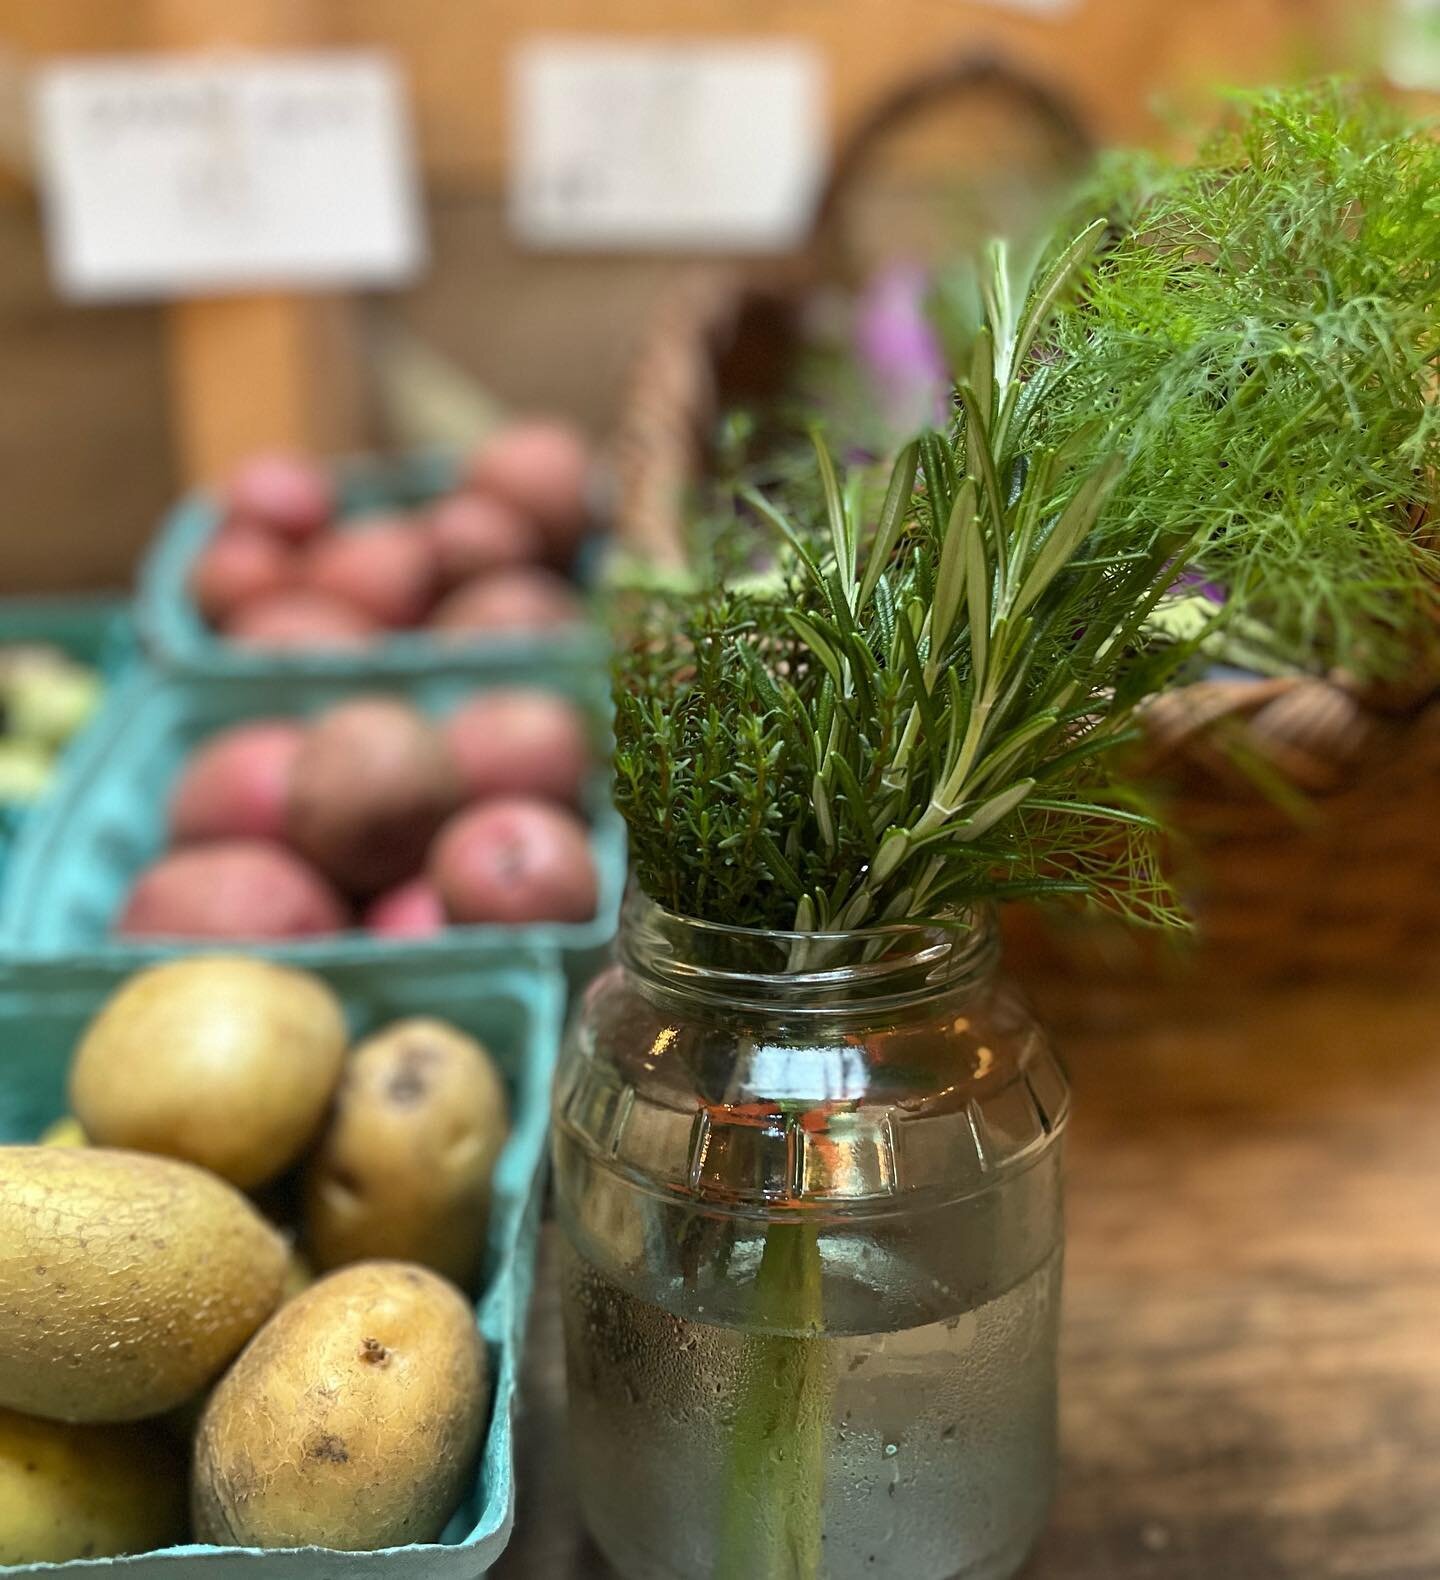 fresh herbs + food as medicine 

My early days as an herbalist included very few culinaries: i was focused on herbal medicine in the form of teas, tonics, and tinctures. But I&rsquo;m the past several years, the humble culinary herb has completely ch